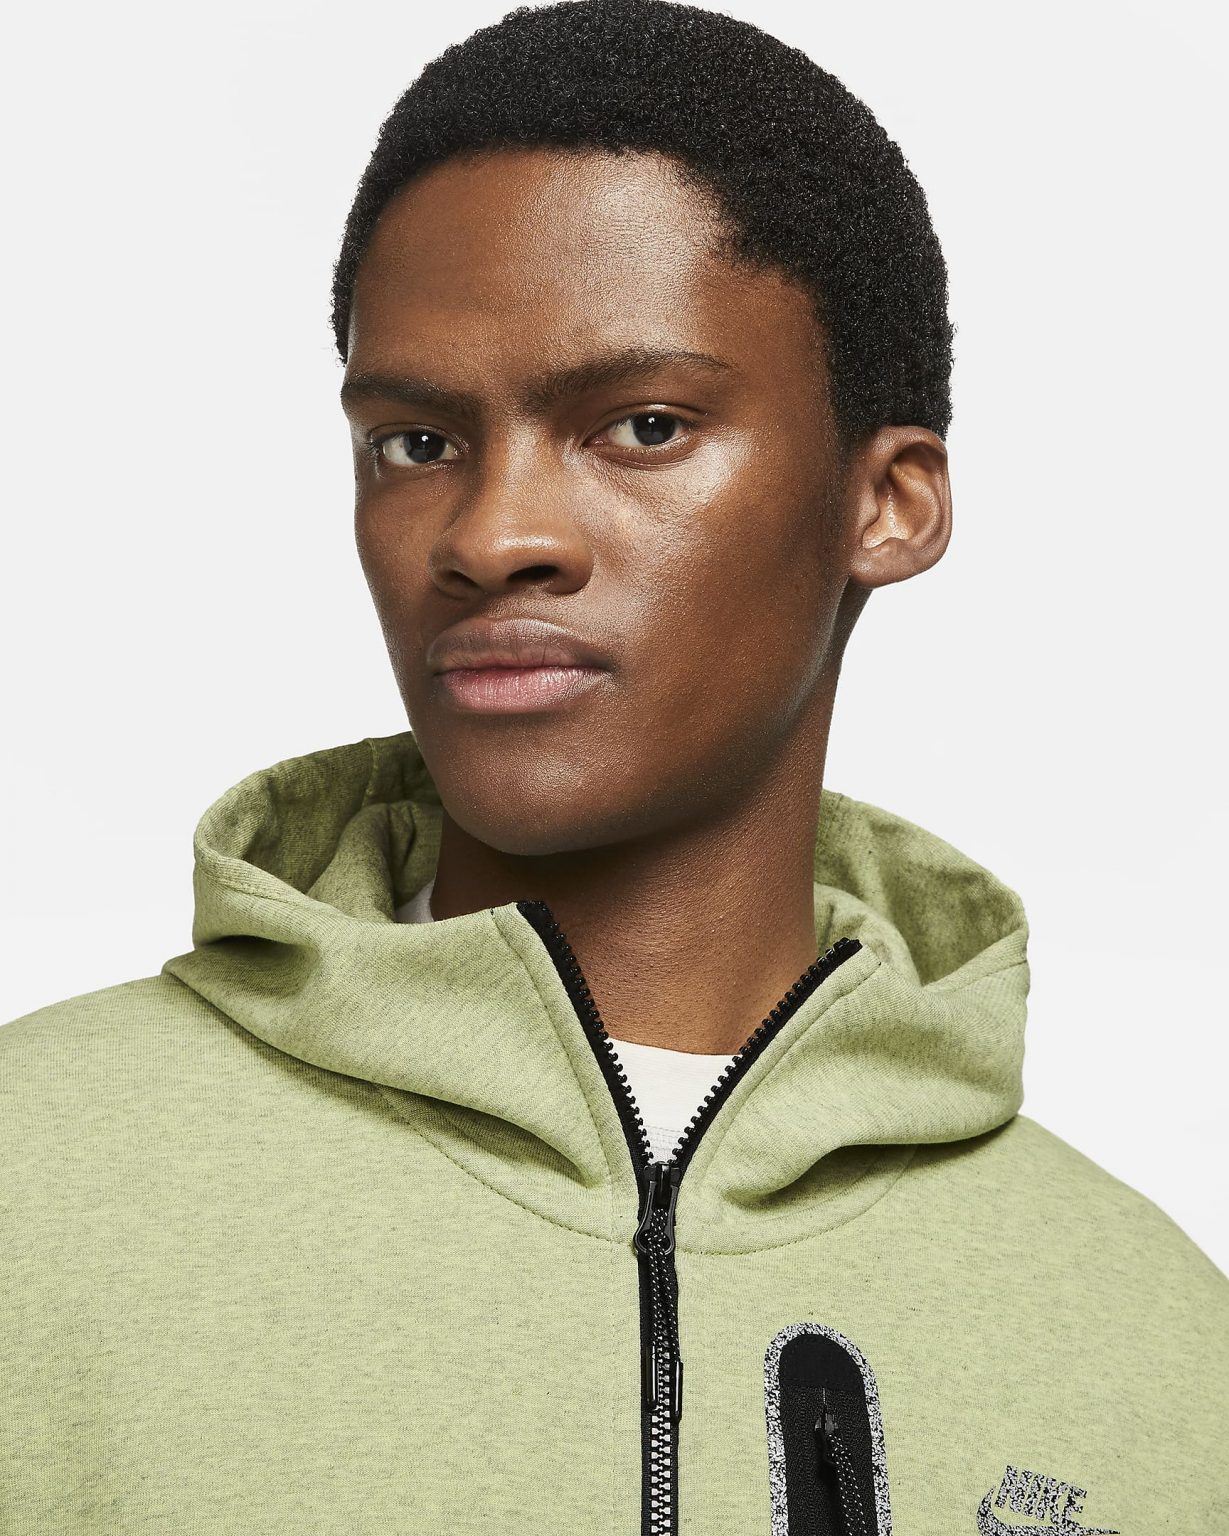 Nike Tech Fleece Hoodie and Joggers in Lime Ice Green